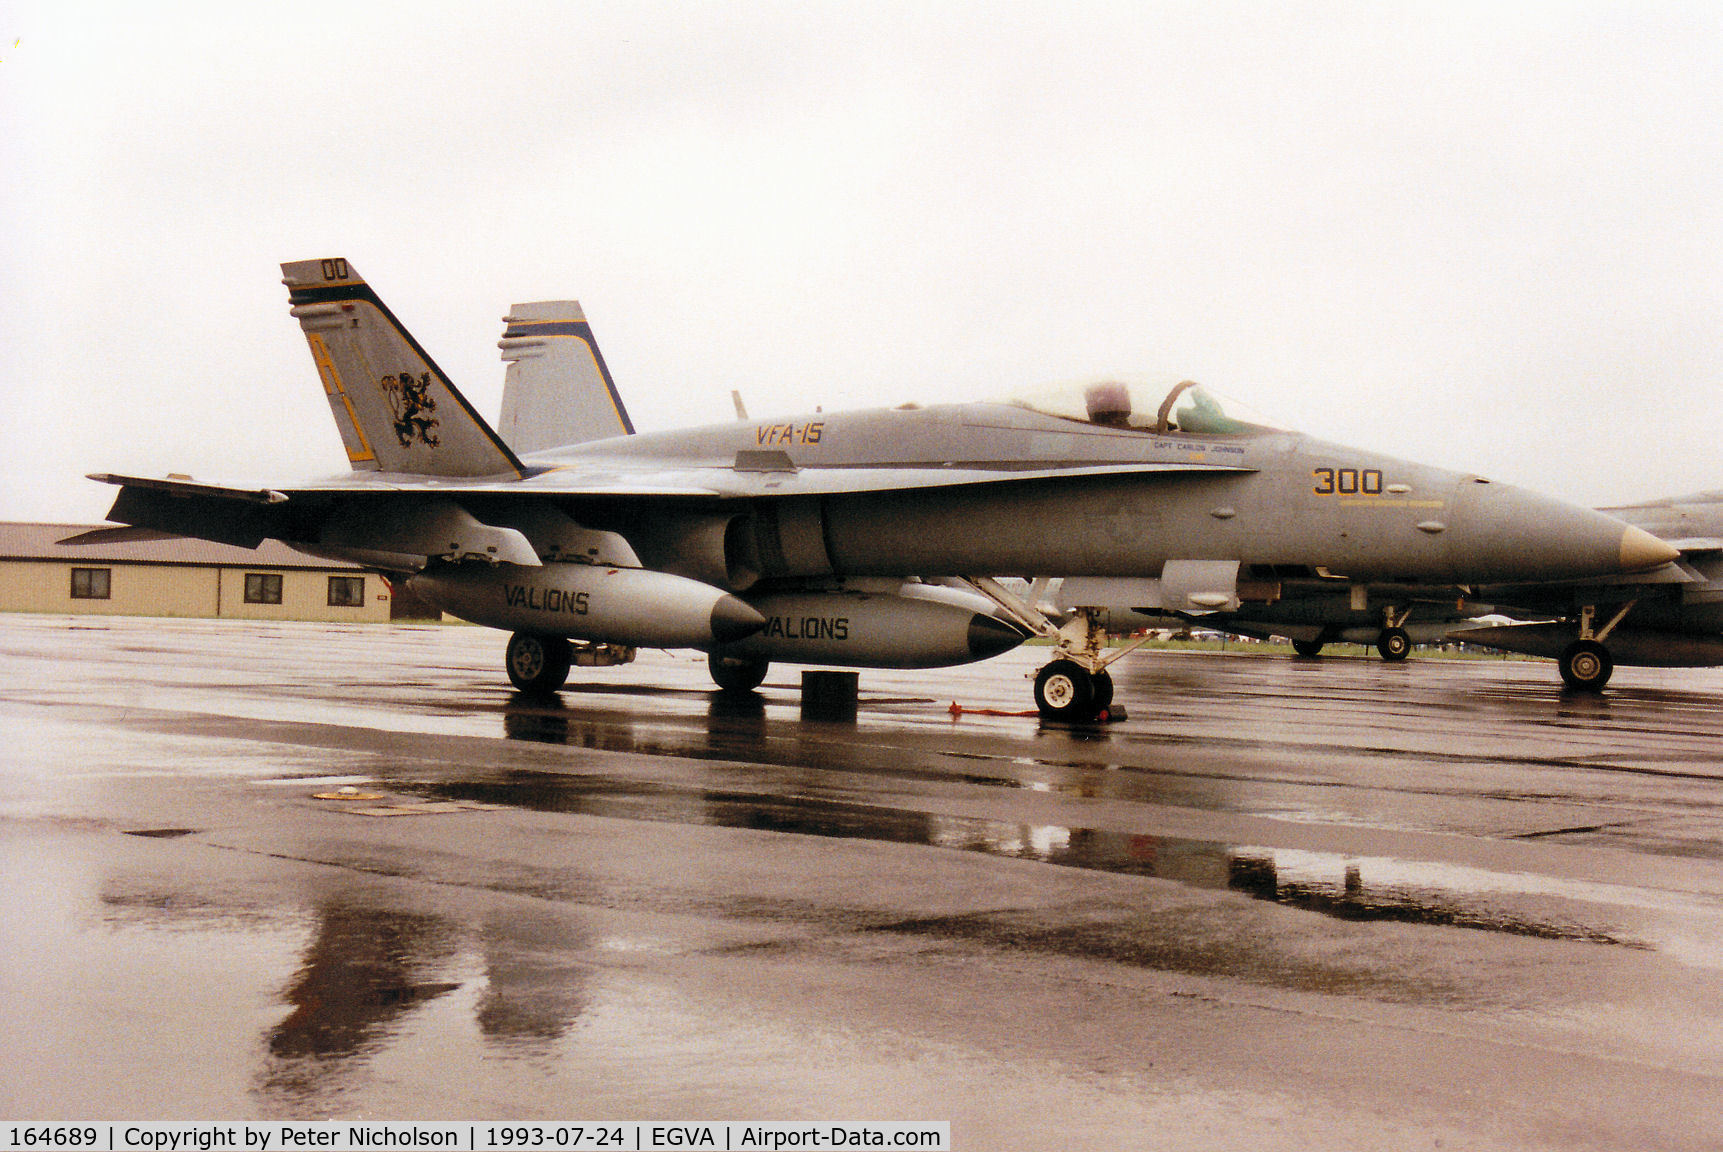 164689, McDonnell Douglas F/A-18C Hornet C/N 1122/C300, F/A-18C Hornet, callsign Navy Alpha Juliet 300, of Strike Fighter Squadron VFA-15 on display at the 1993 Intnl Air Tattoo at RAF Fairford.